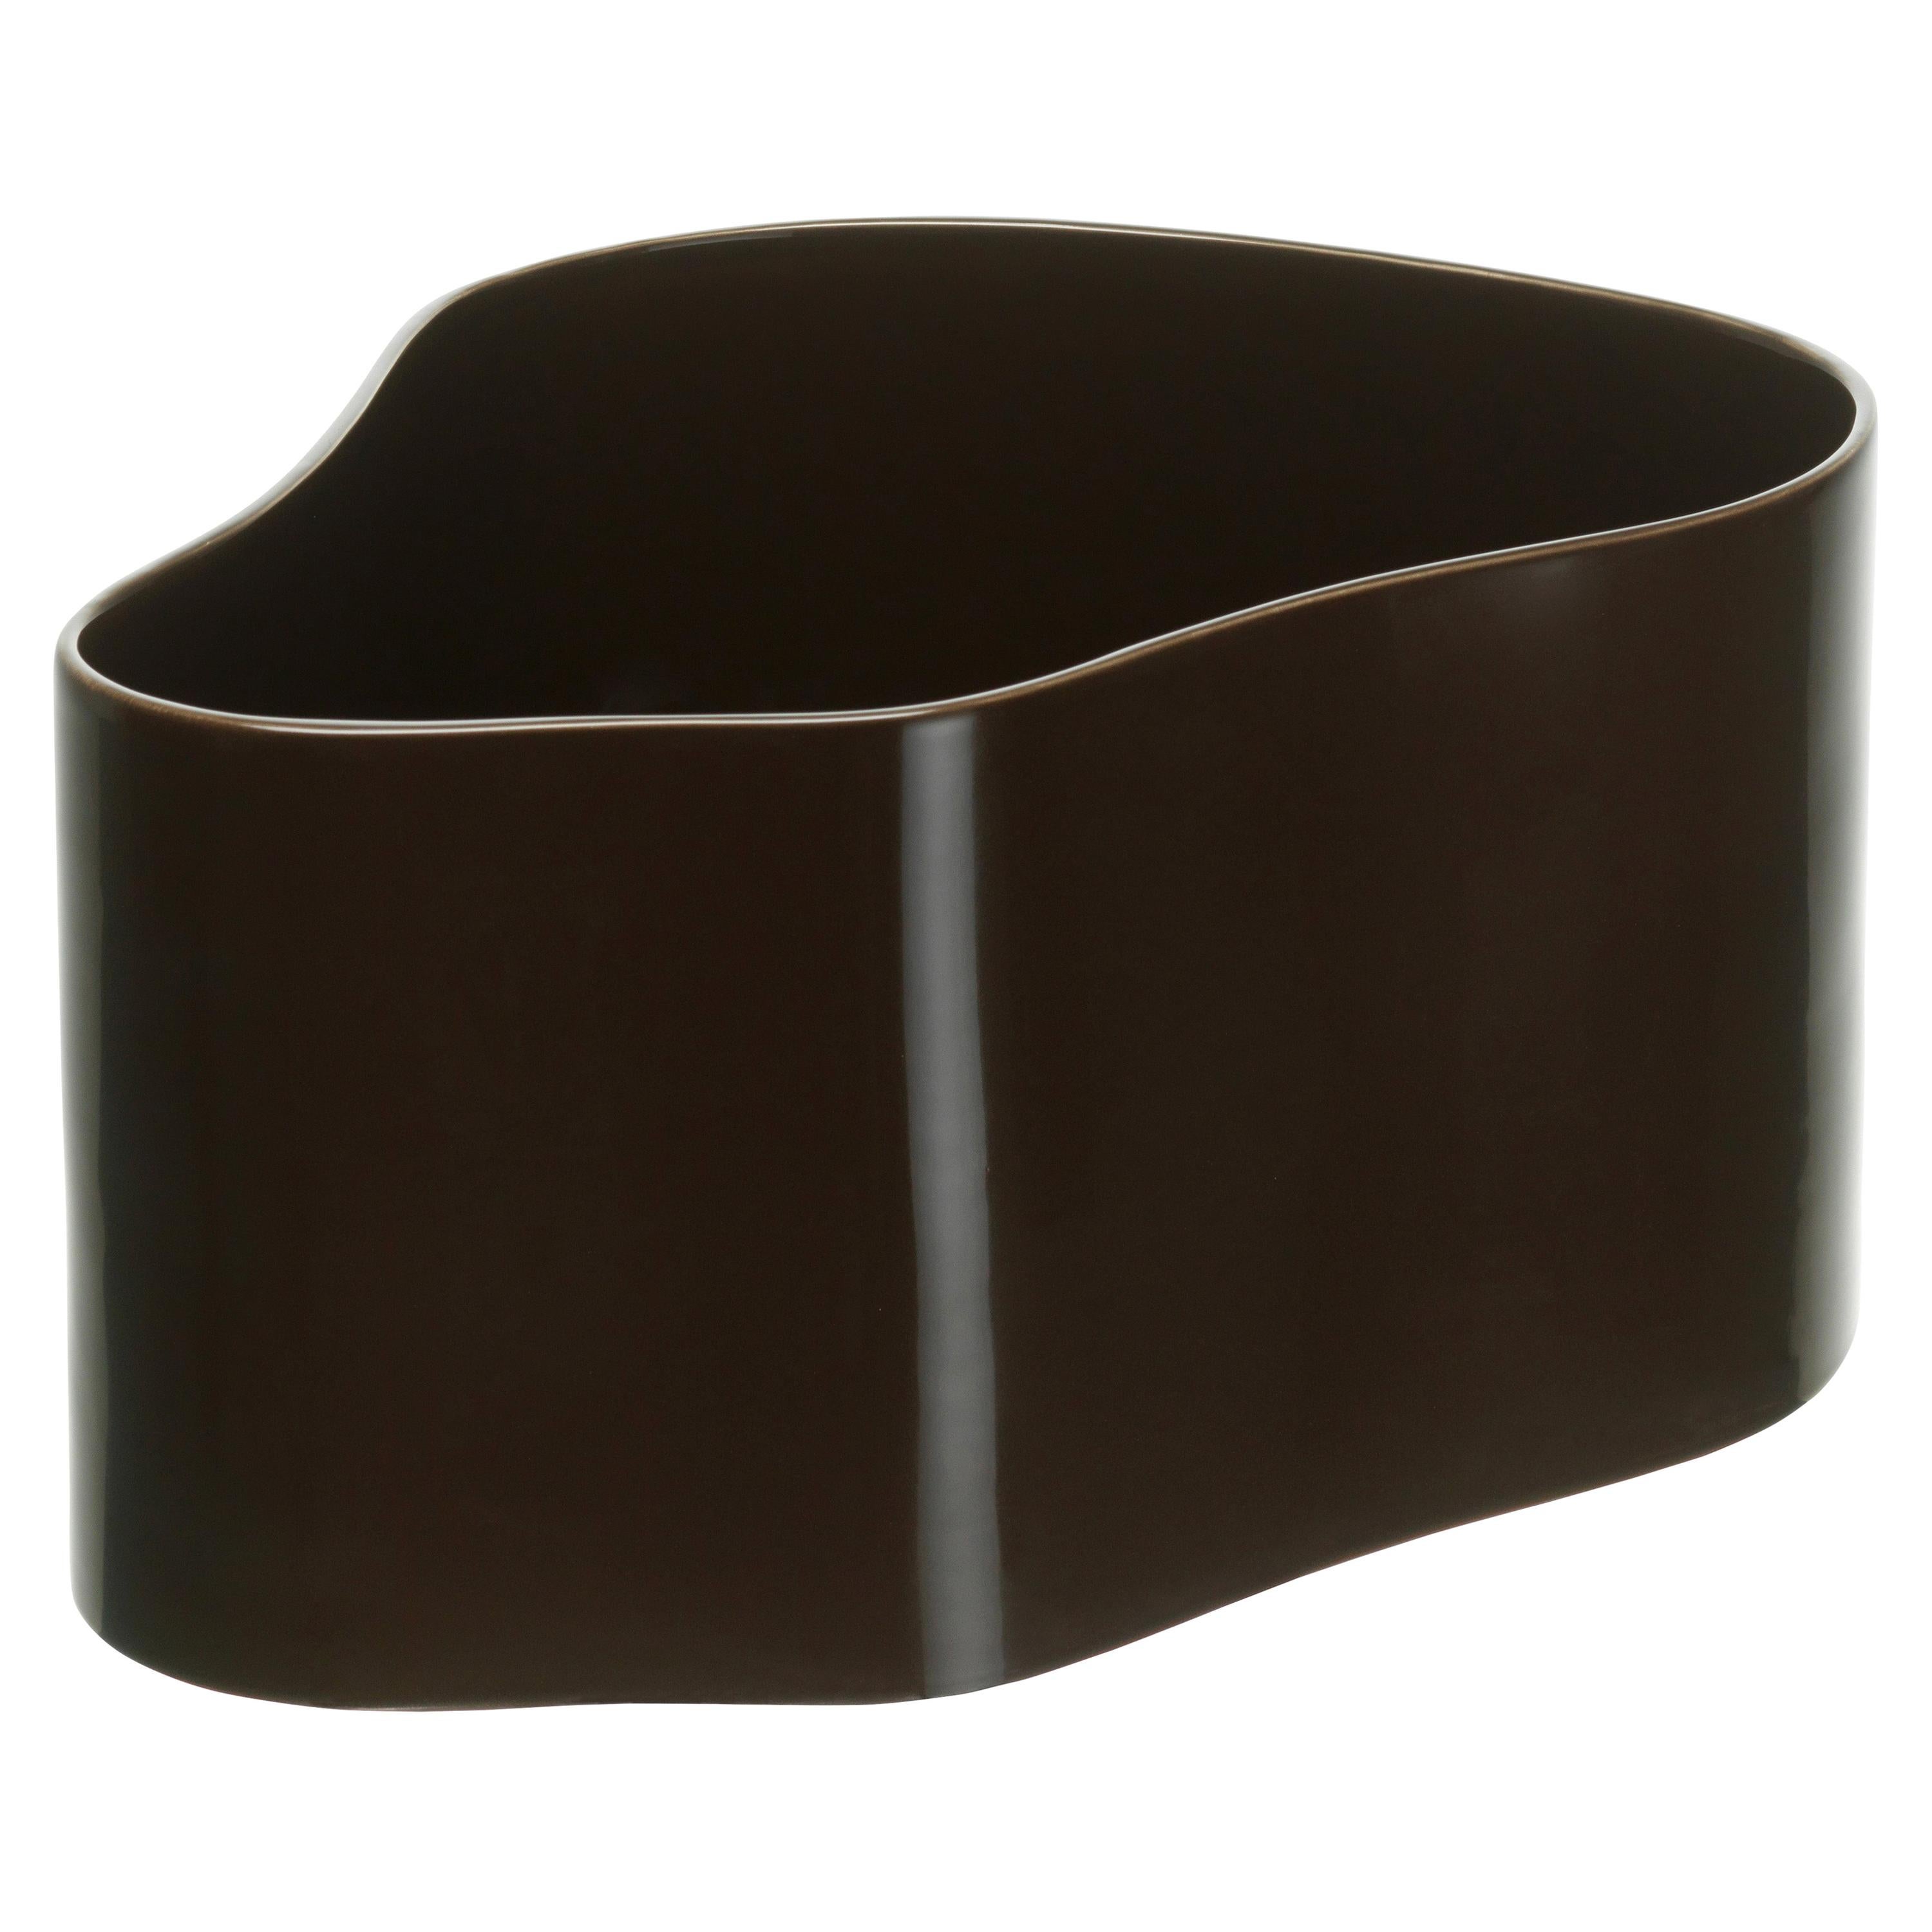 Authentic Large Riihitie Plant Pot A in Brown by Aino Aalto & Artek For Sale